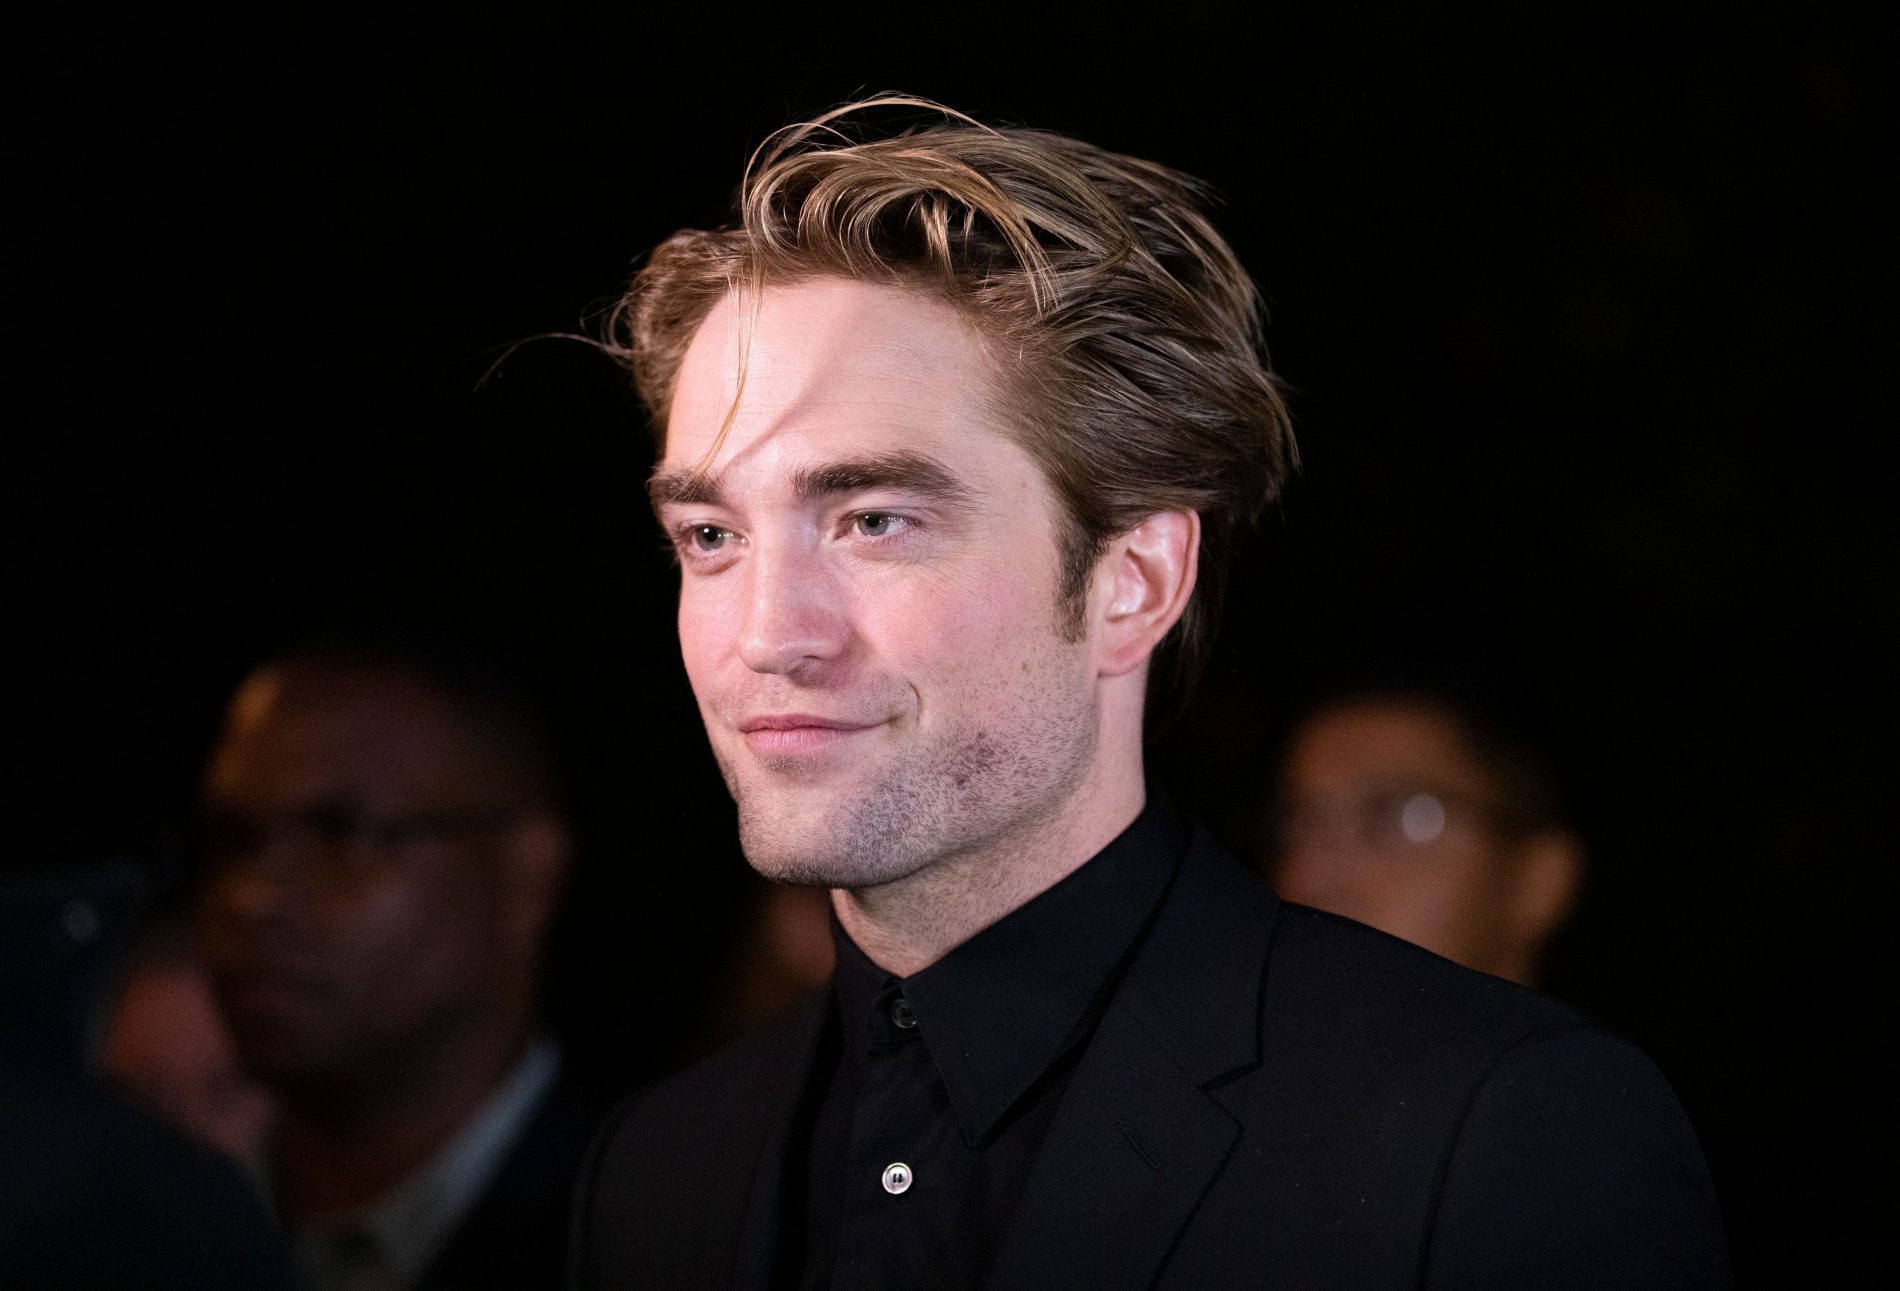 Robert Pattinson named “the Most Handsome Man in the World”